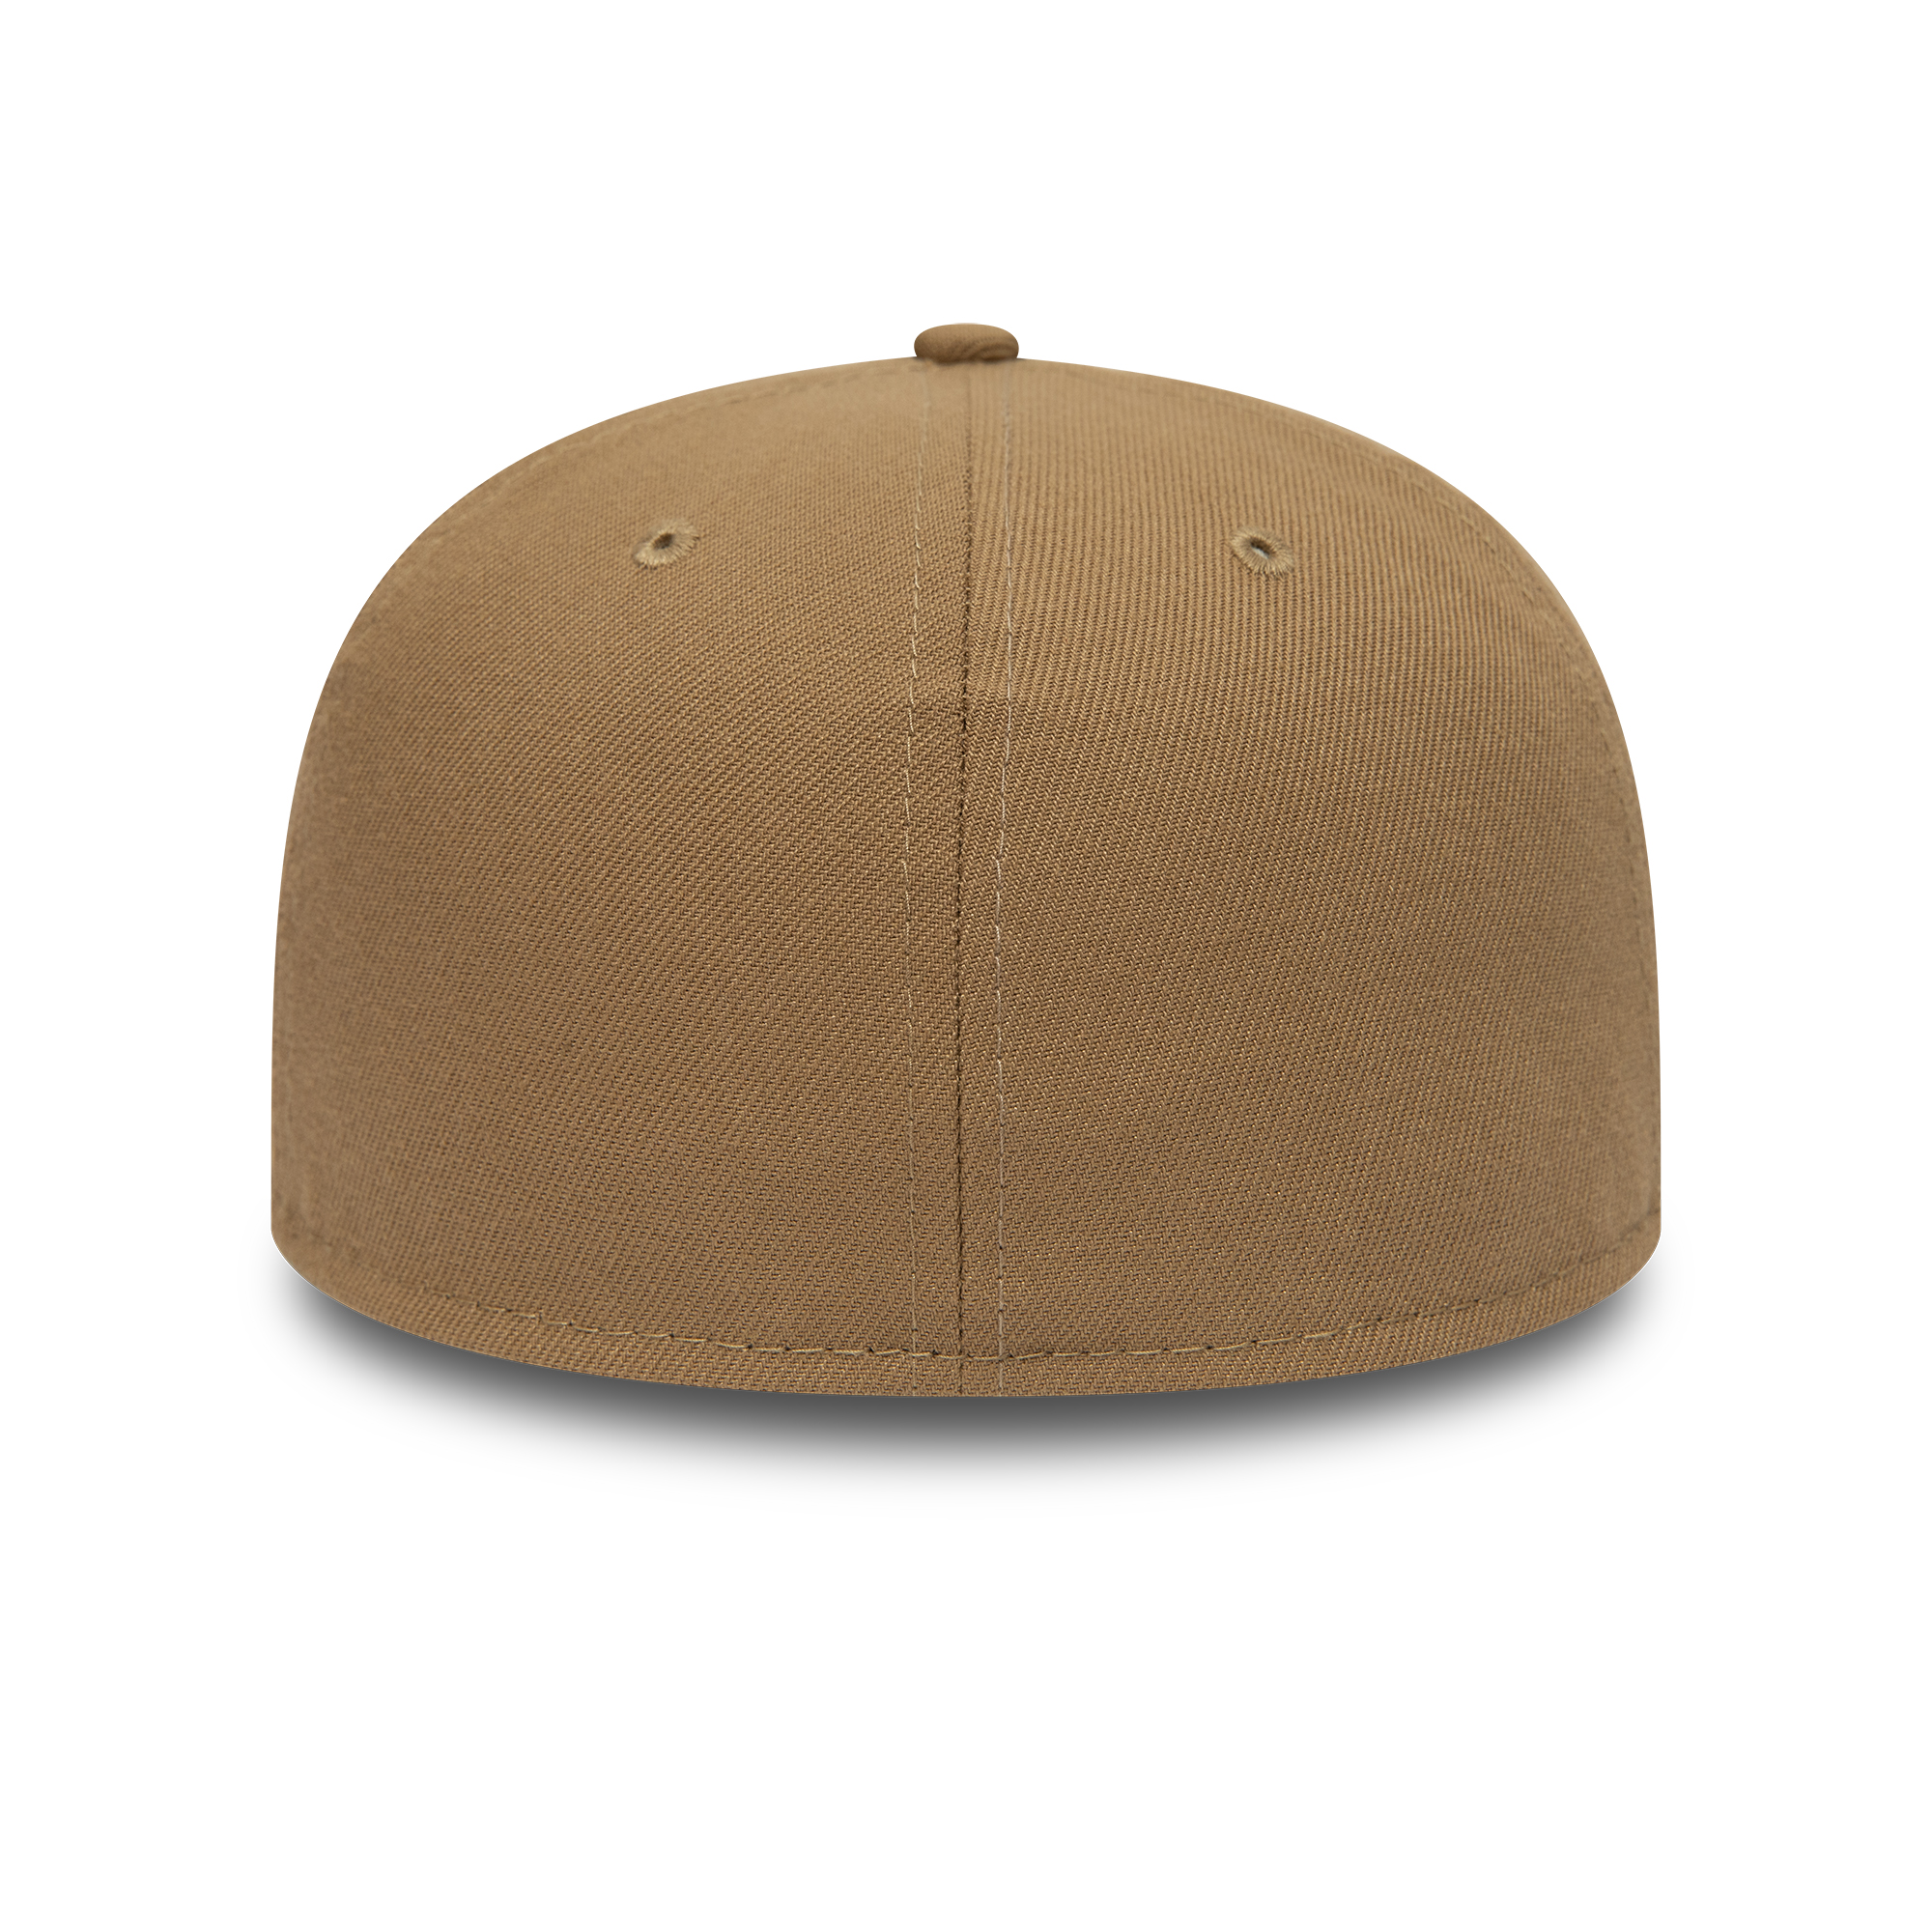 New Era Brown 59FIFTY Fitted Cap